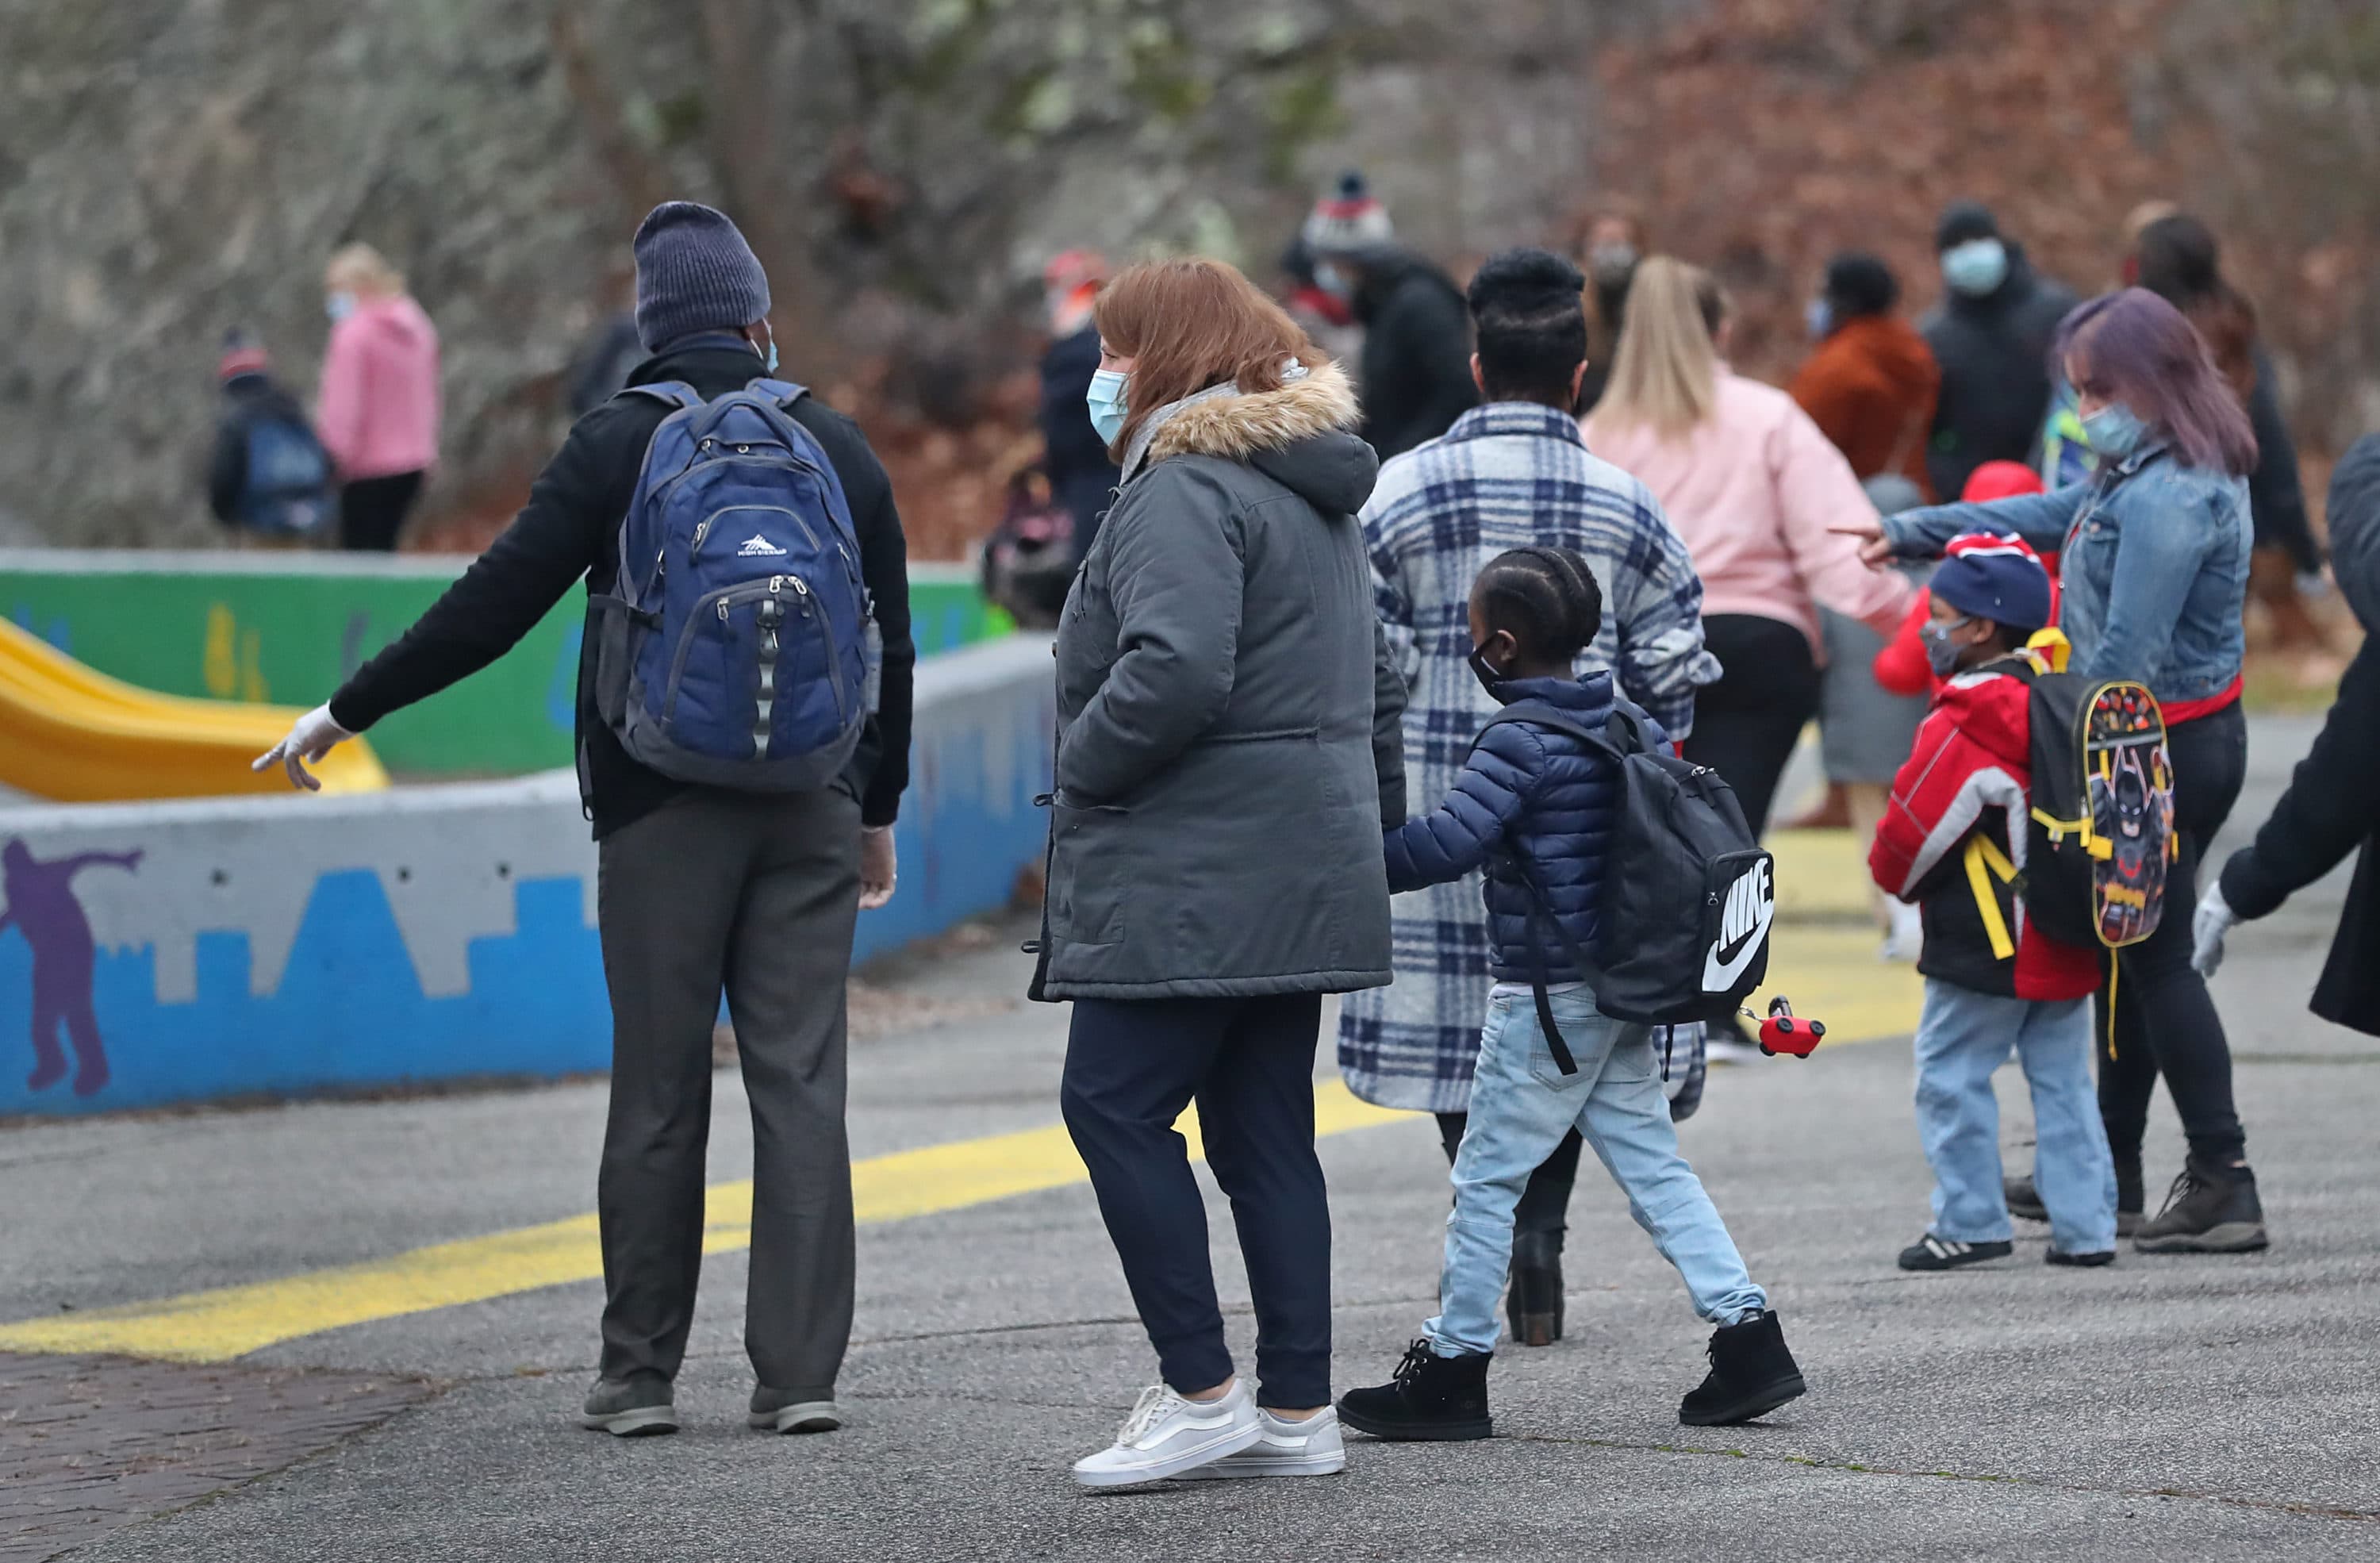 Teachers and students walk to the entrance at the Mattahunt Elementary School in Boston's Mattapan before the day's start on Dec. 14, 2020. (David L. Ryan/The Boston Globe via Getty Images)